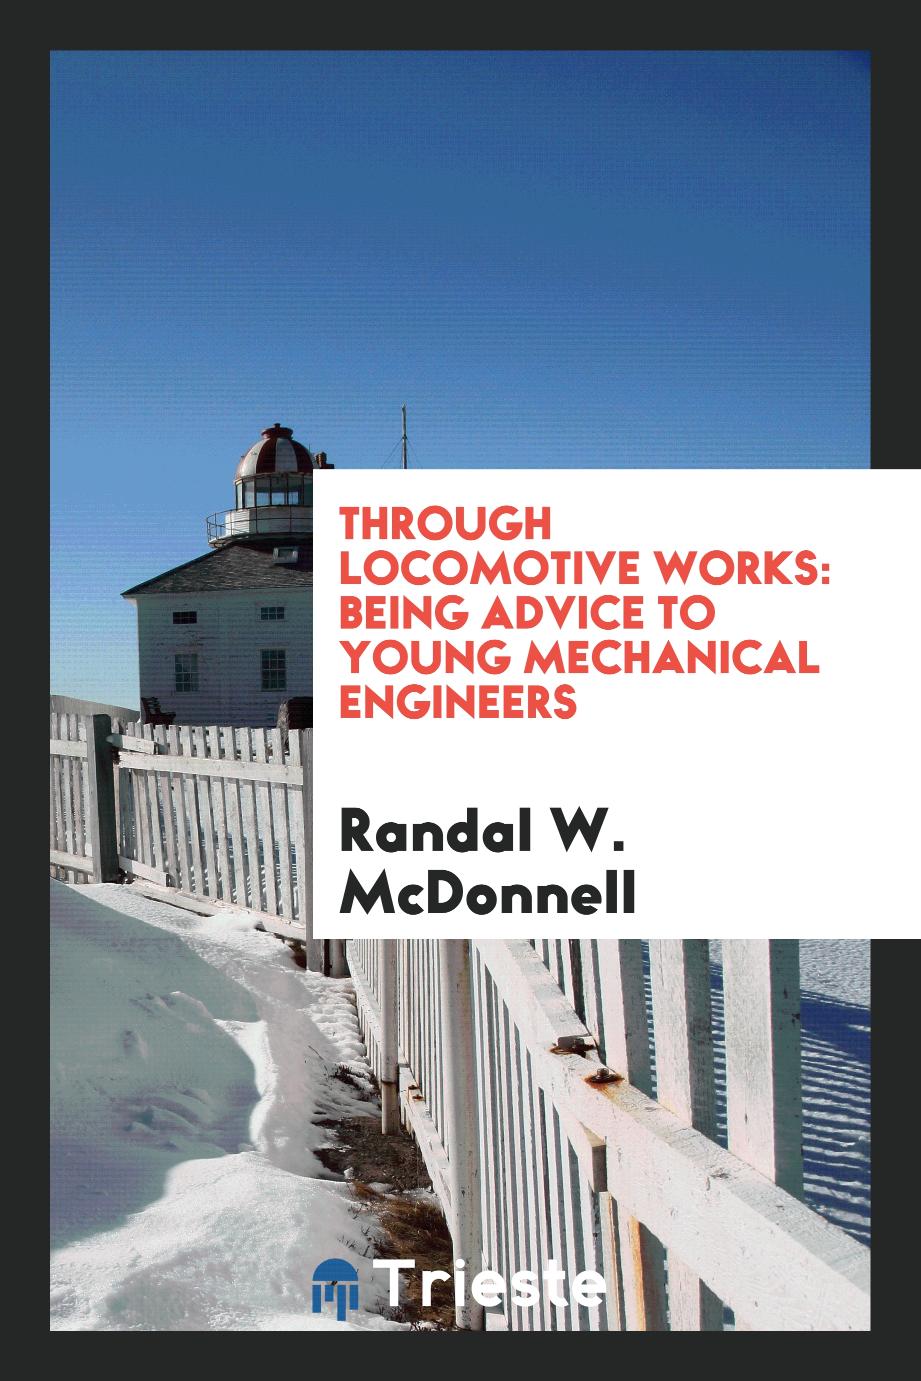 Through Locomotive Works: Being Advice to Young Mechanical Engineers